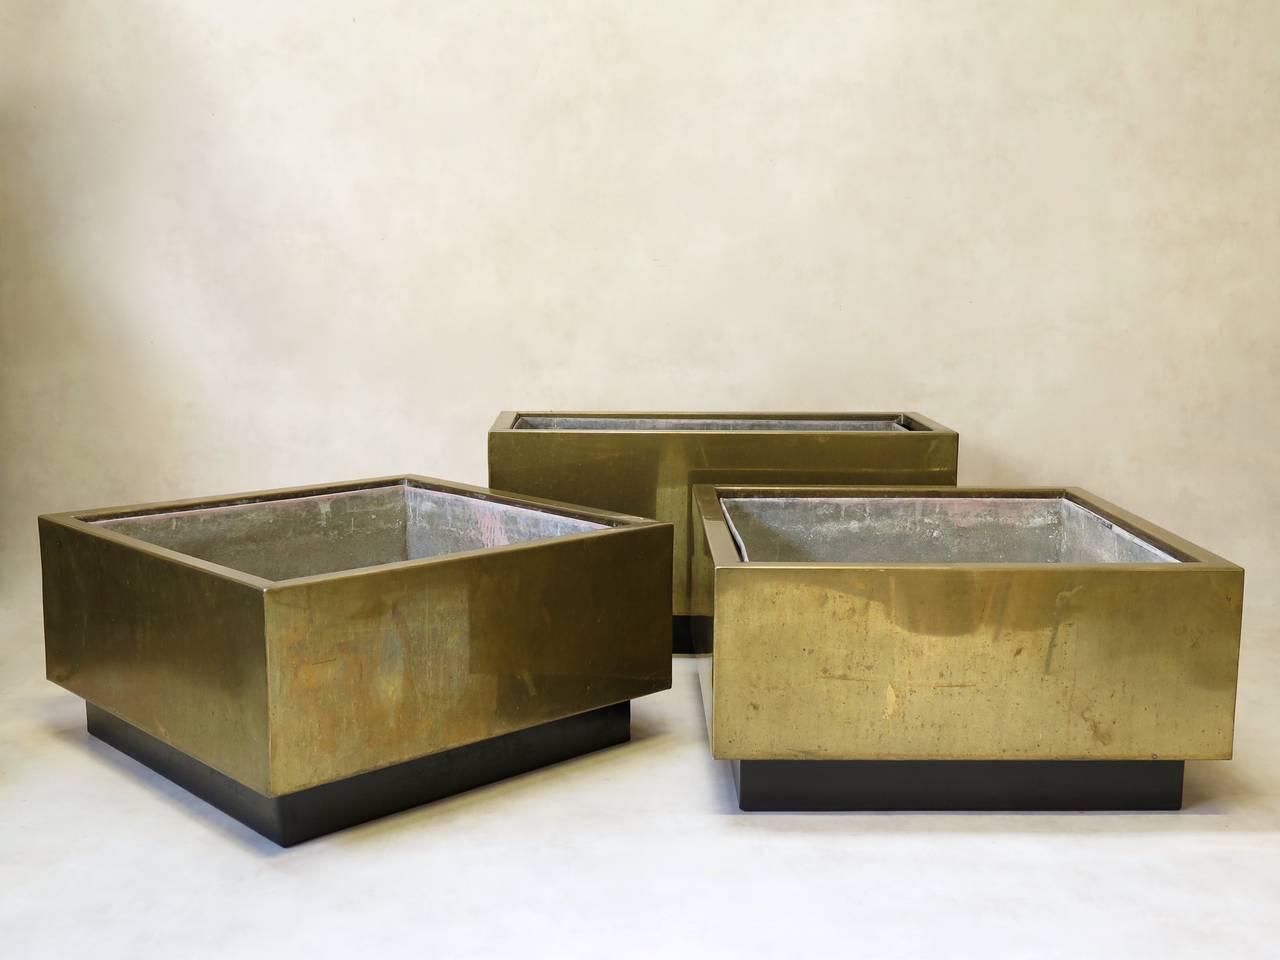 Chic set of two square brass jardinieres. Raised on a black-painted recessed metal base. The interiors are fitted with removable zinc linings.

